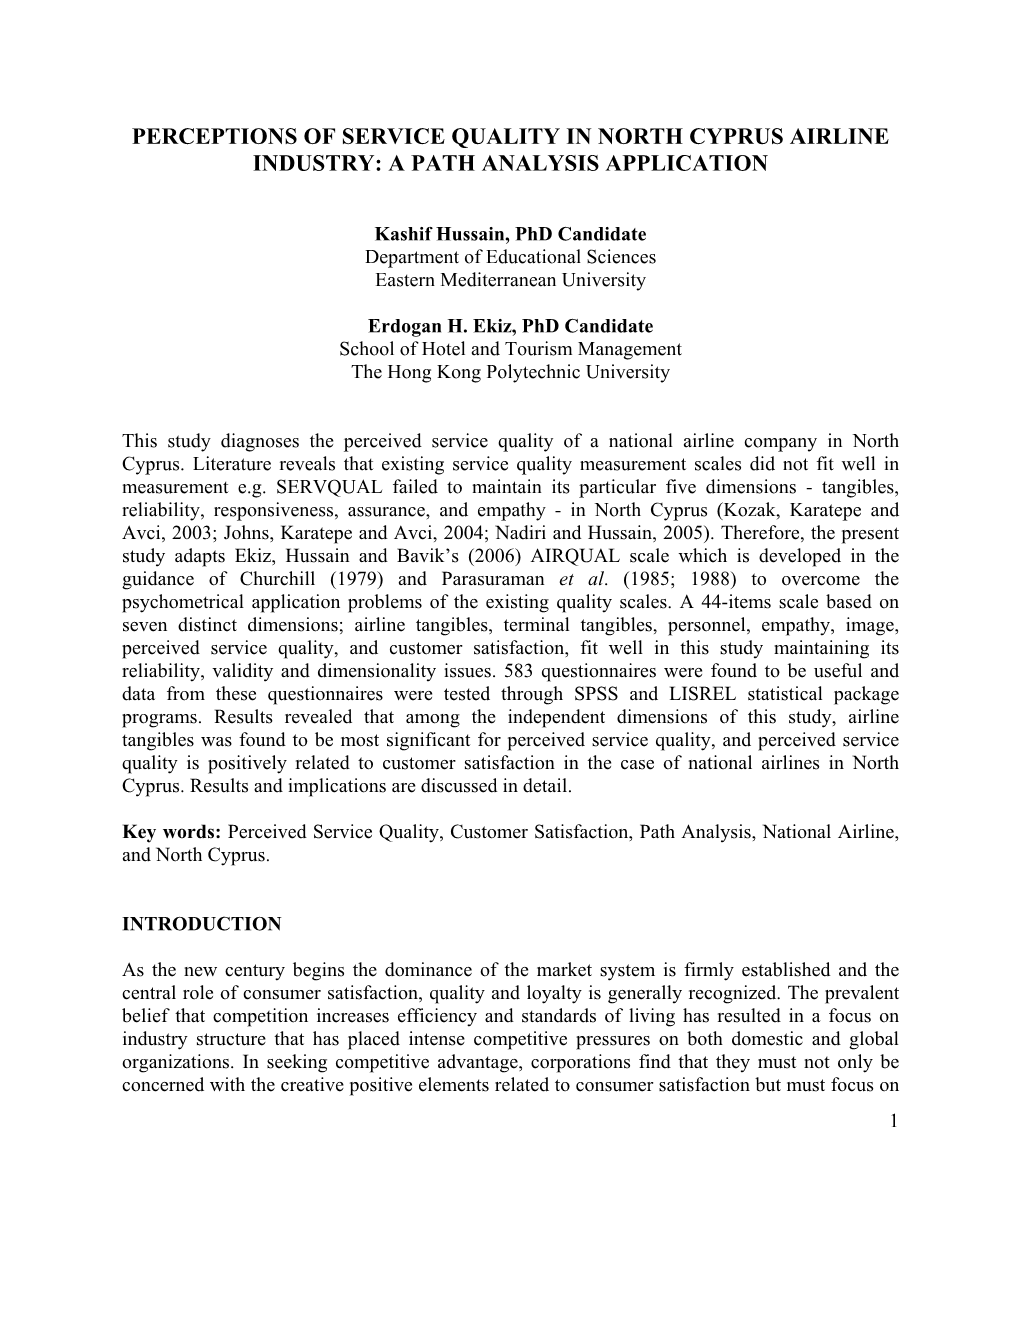 Perceptions of Service Quality in North Cyprus Airline Industry: a Path Analysis Application